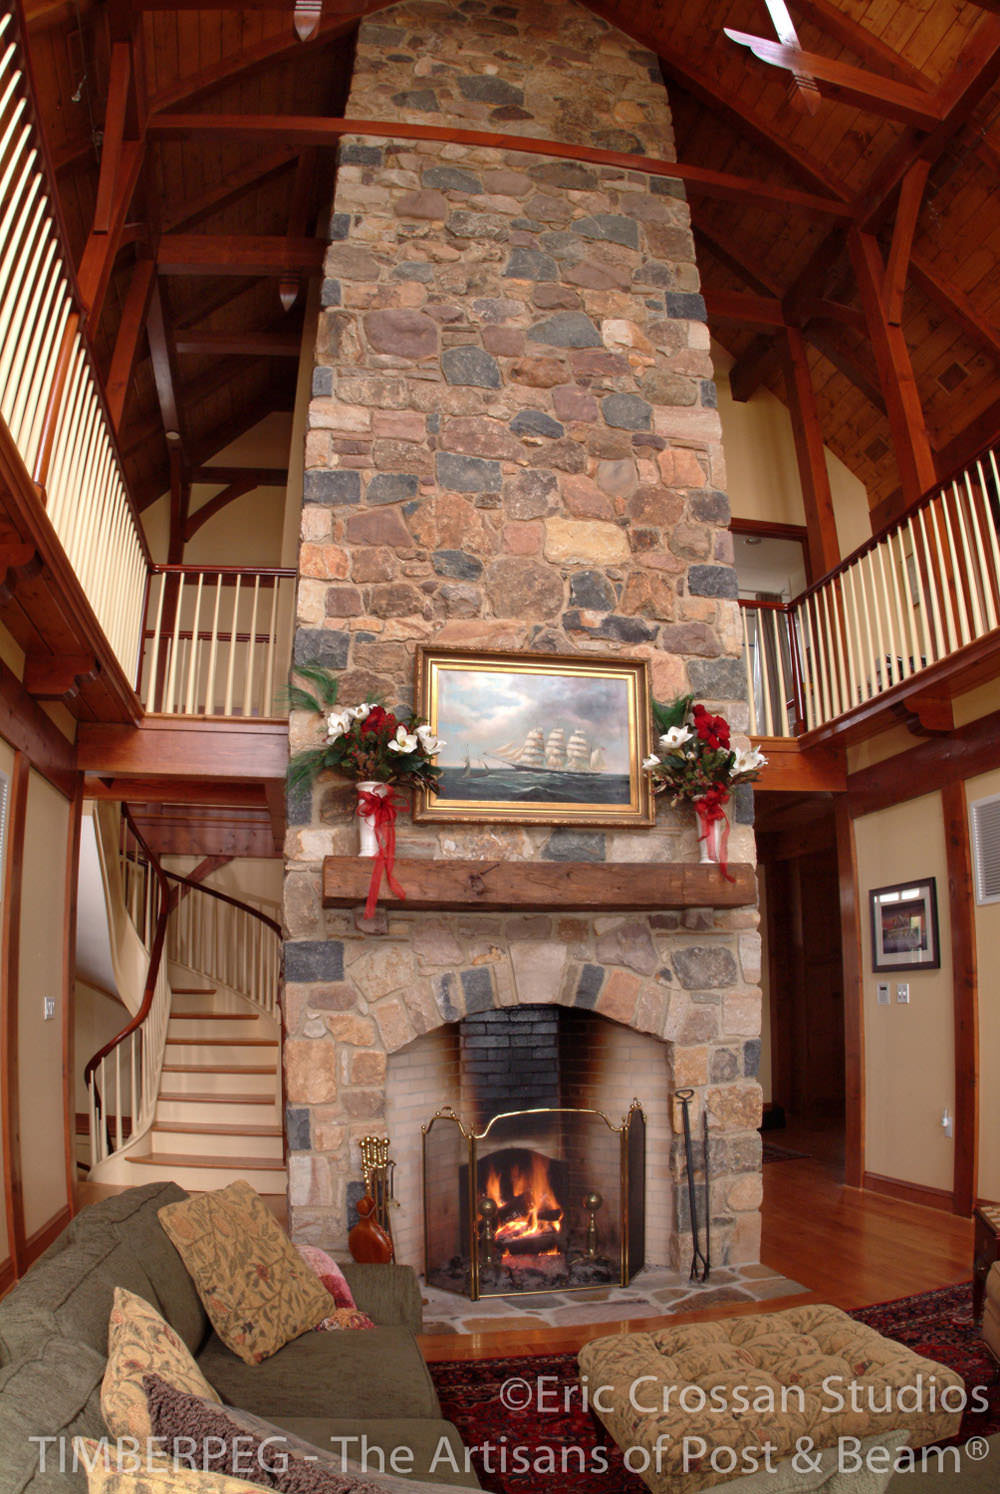 Chestertown, MD (4154) view of fireplace in great room and loft above